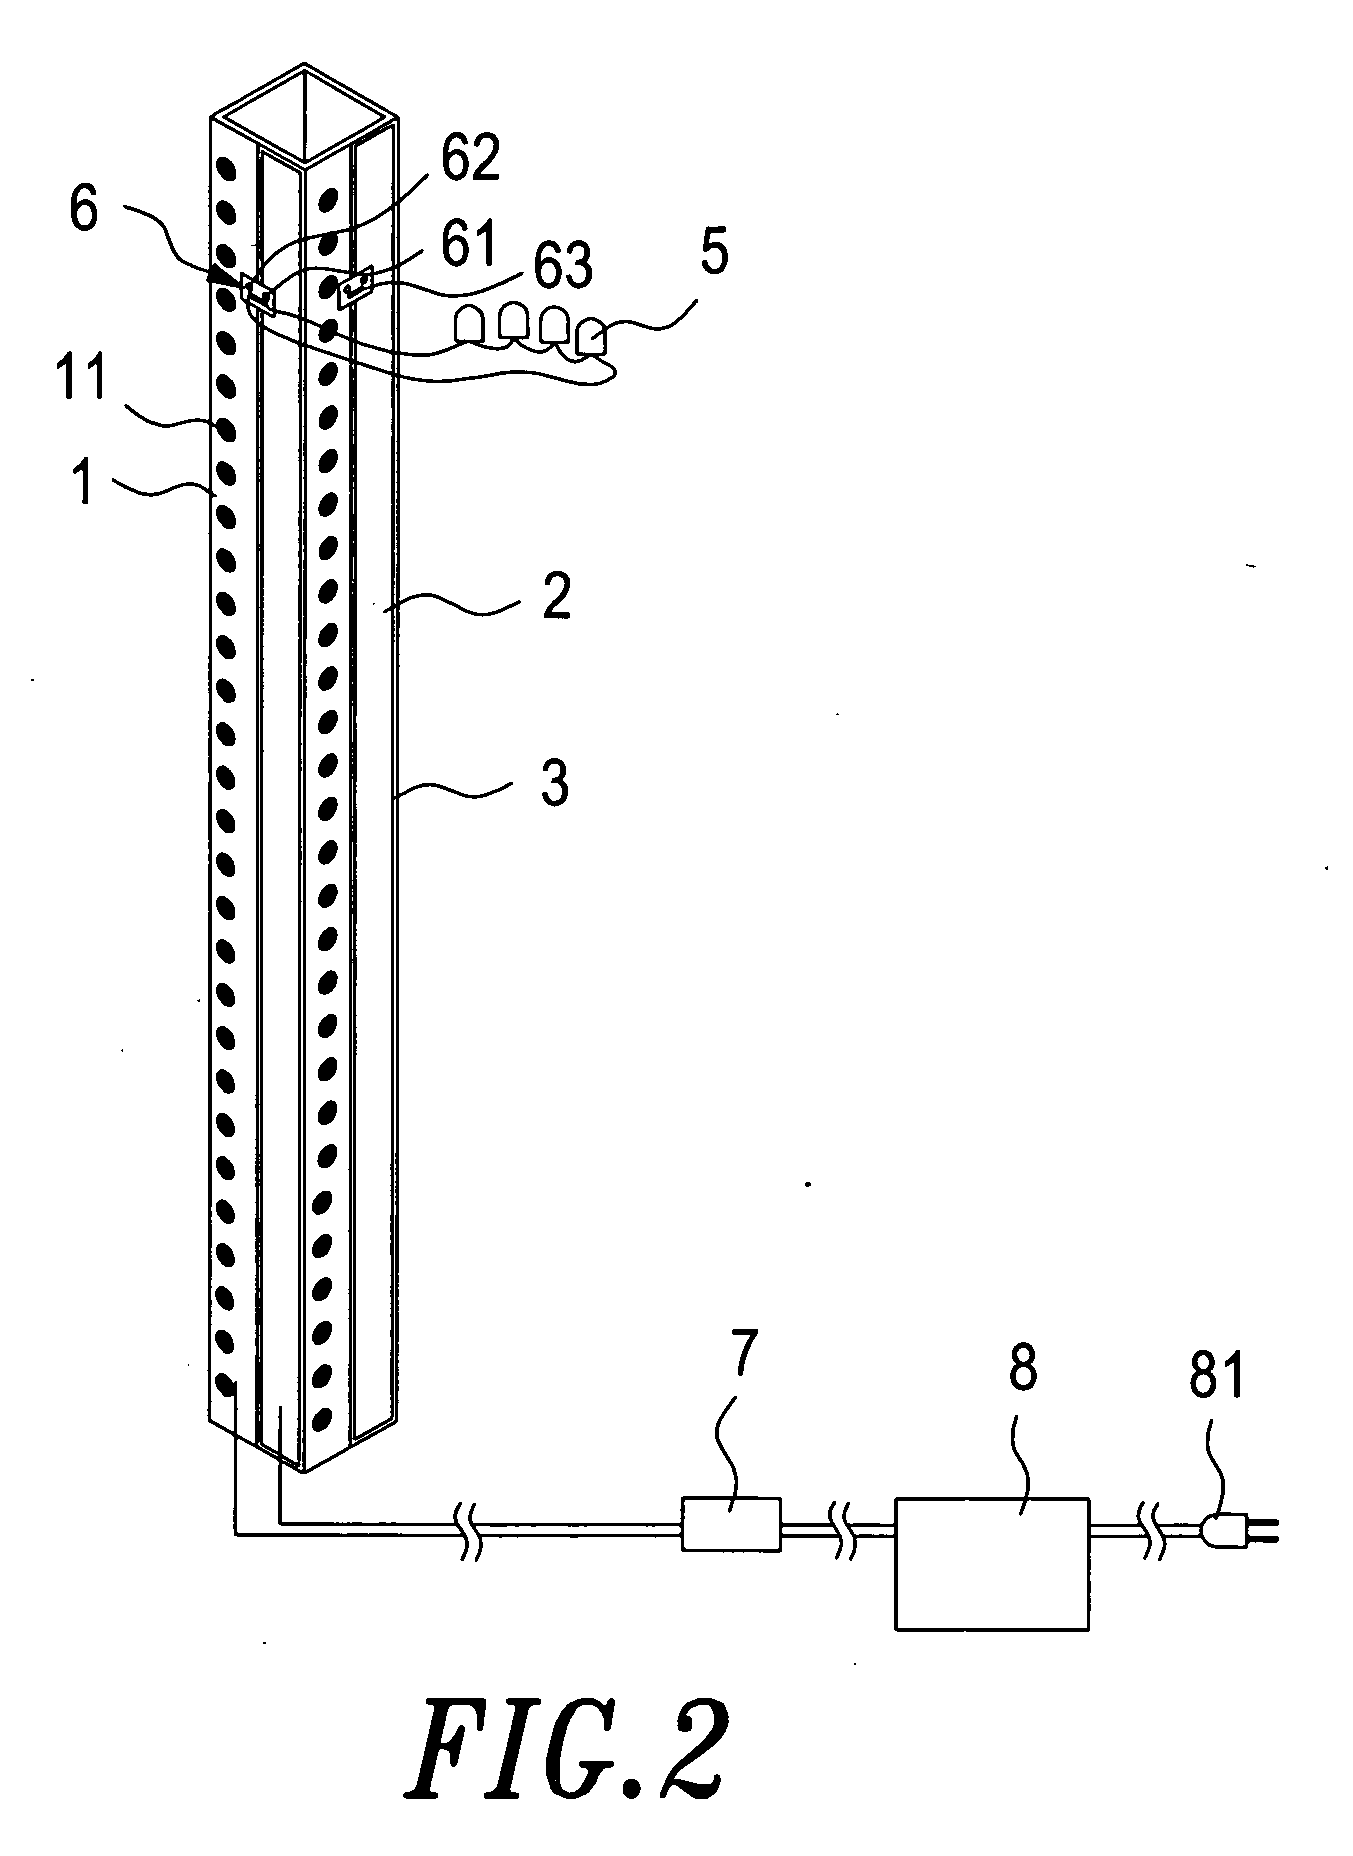 Lighting and flashing christmas tree structure apparatus